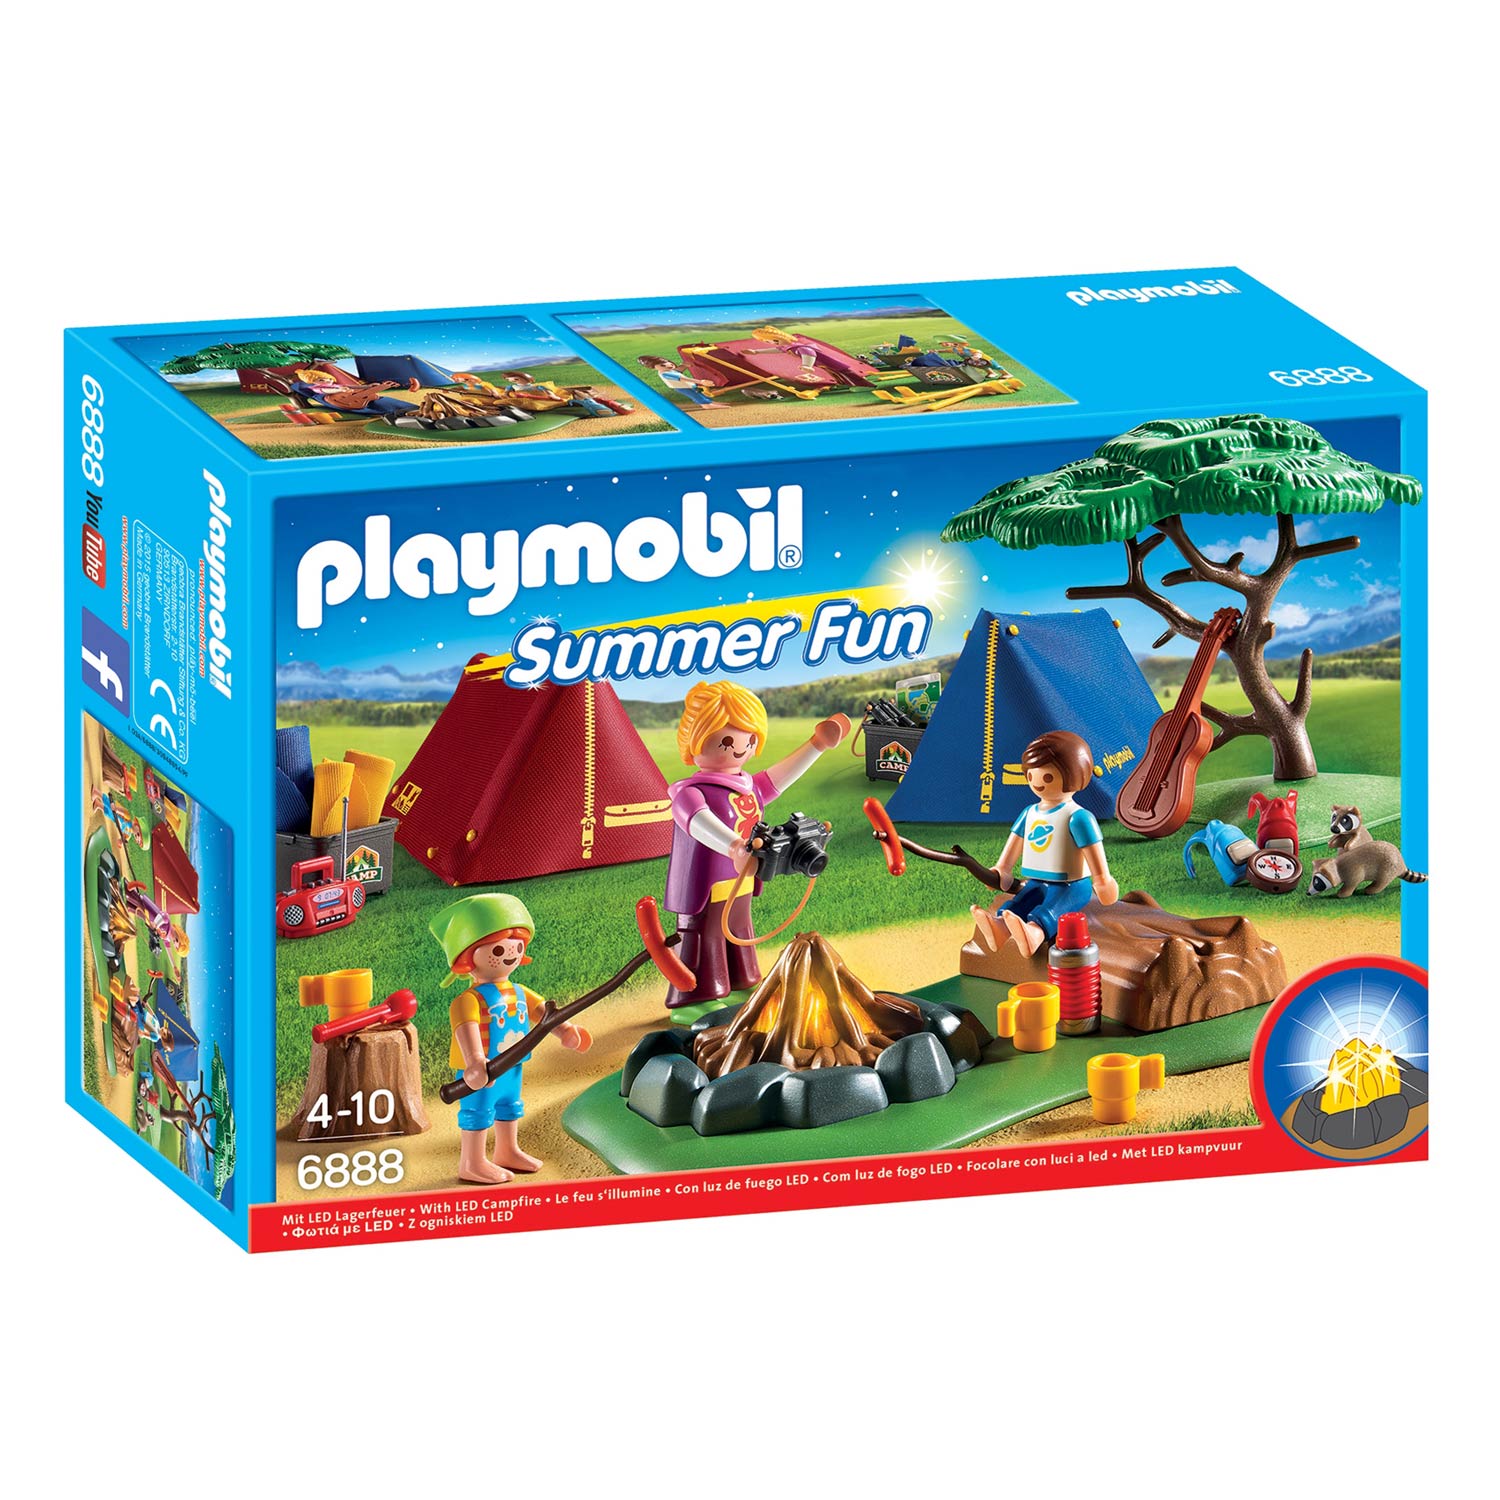 Playmobil 70210 specifications